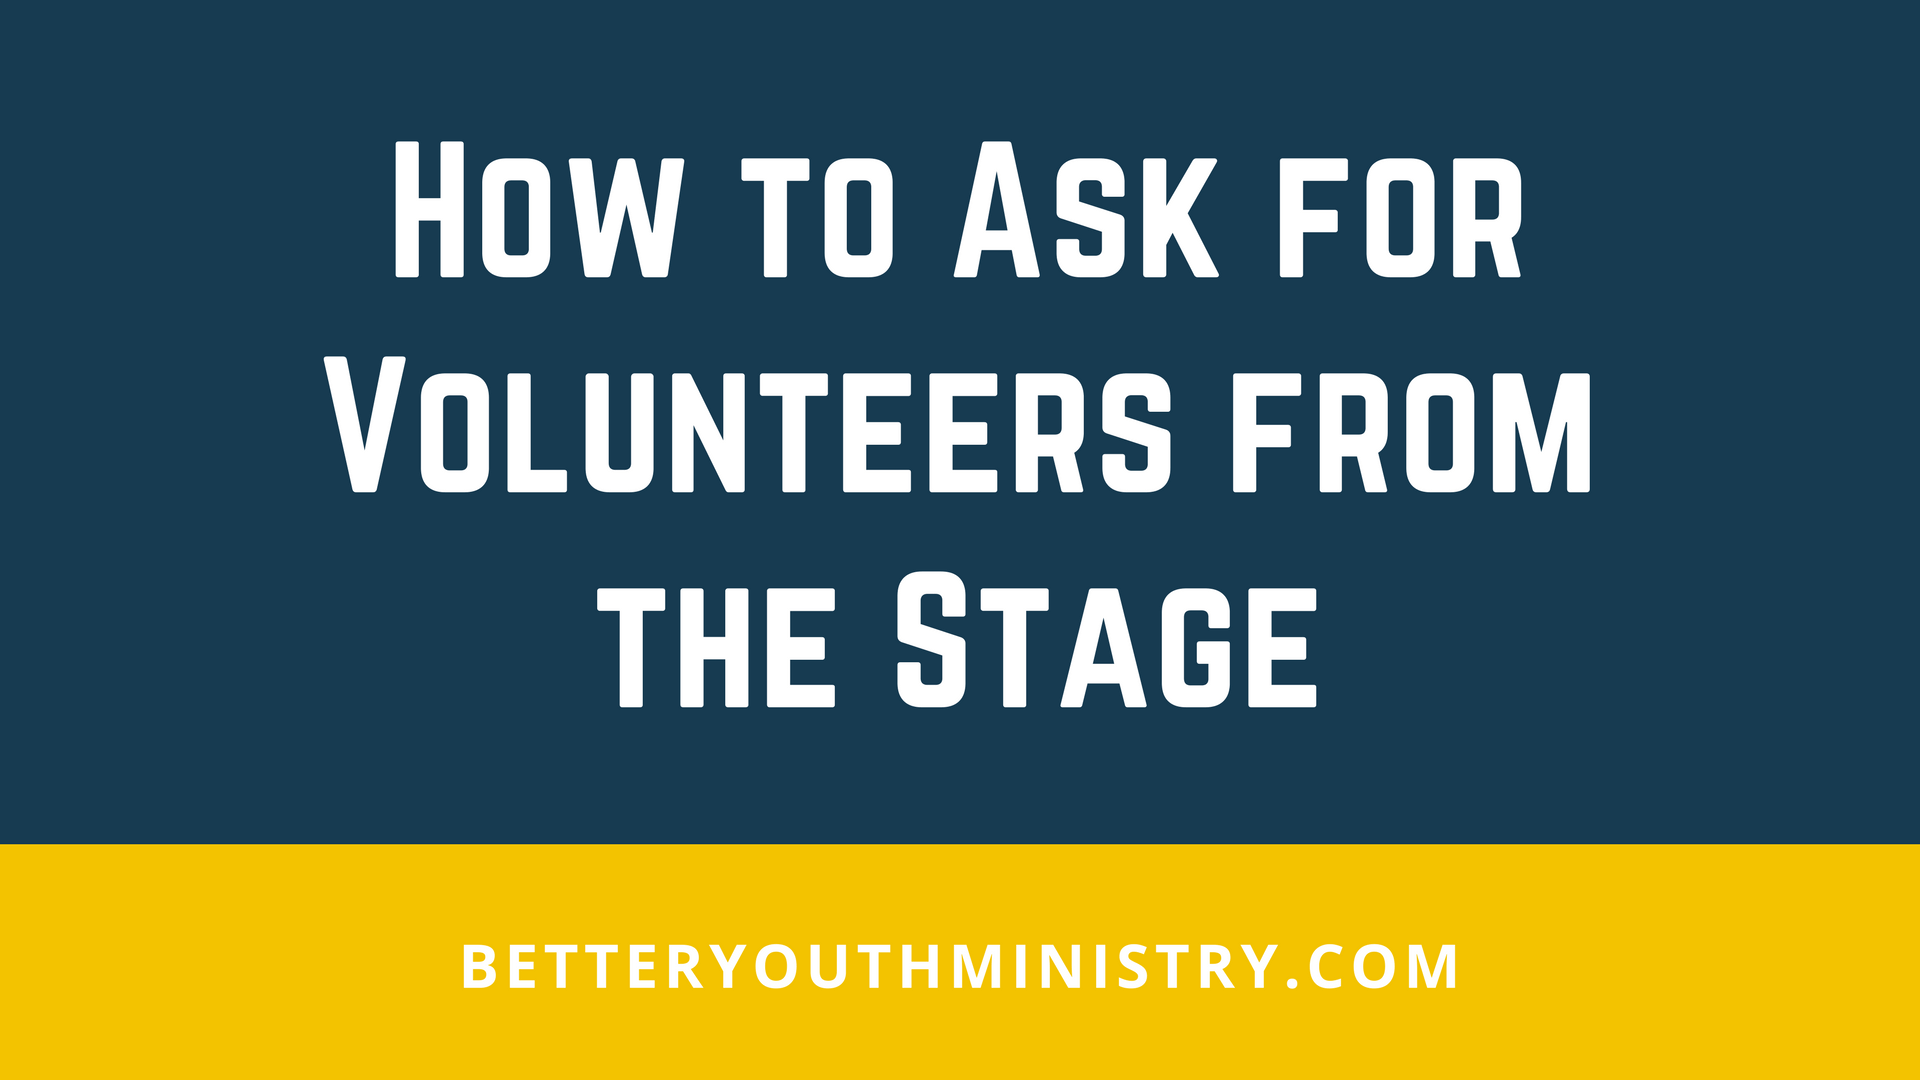 How to Ask for Volunteers from the Stage